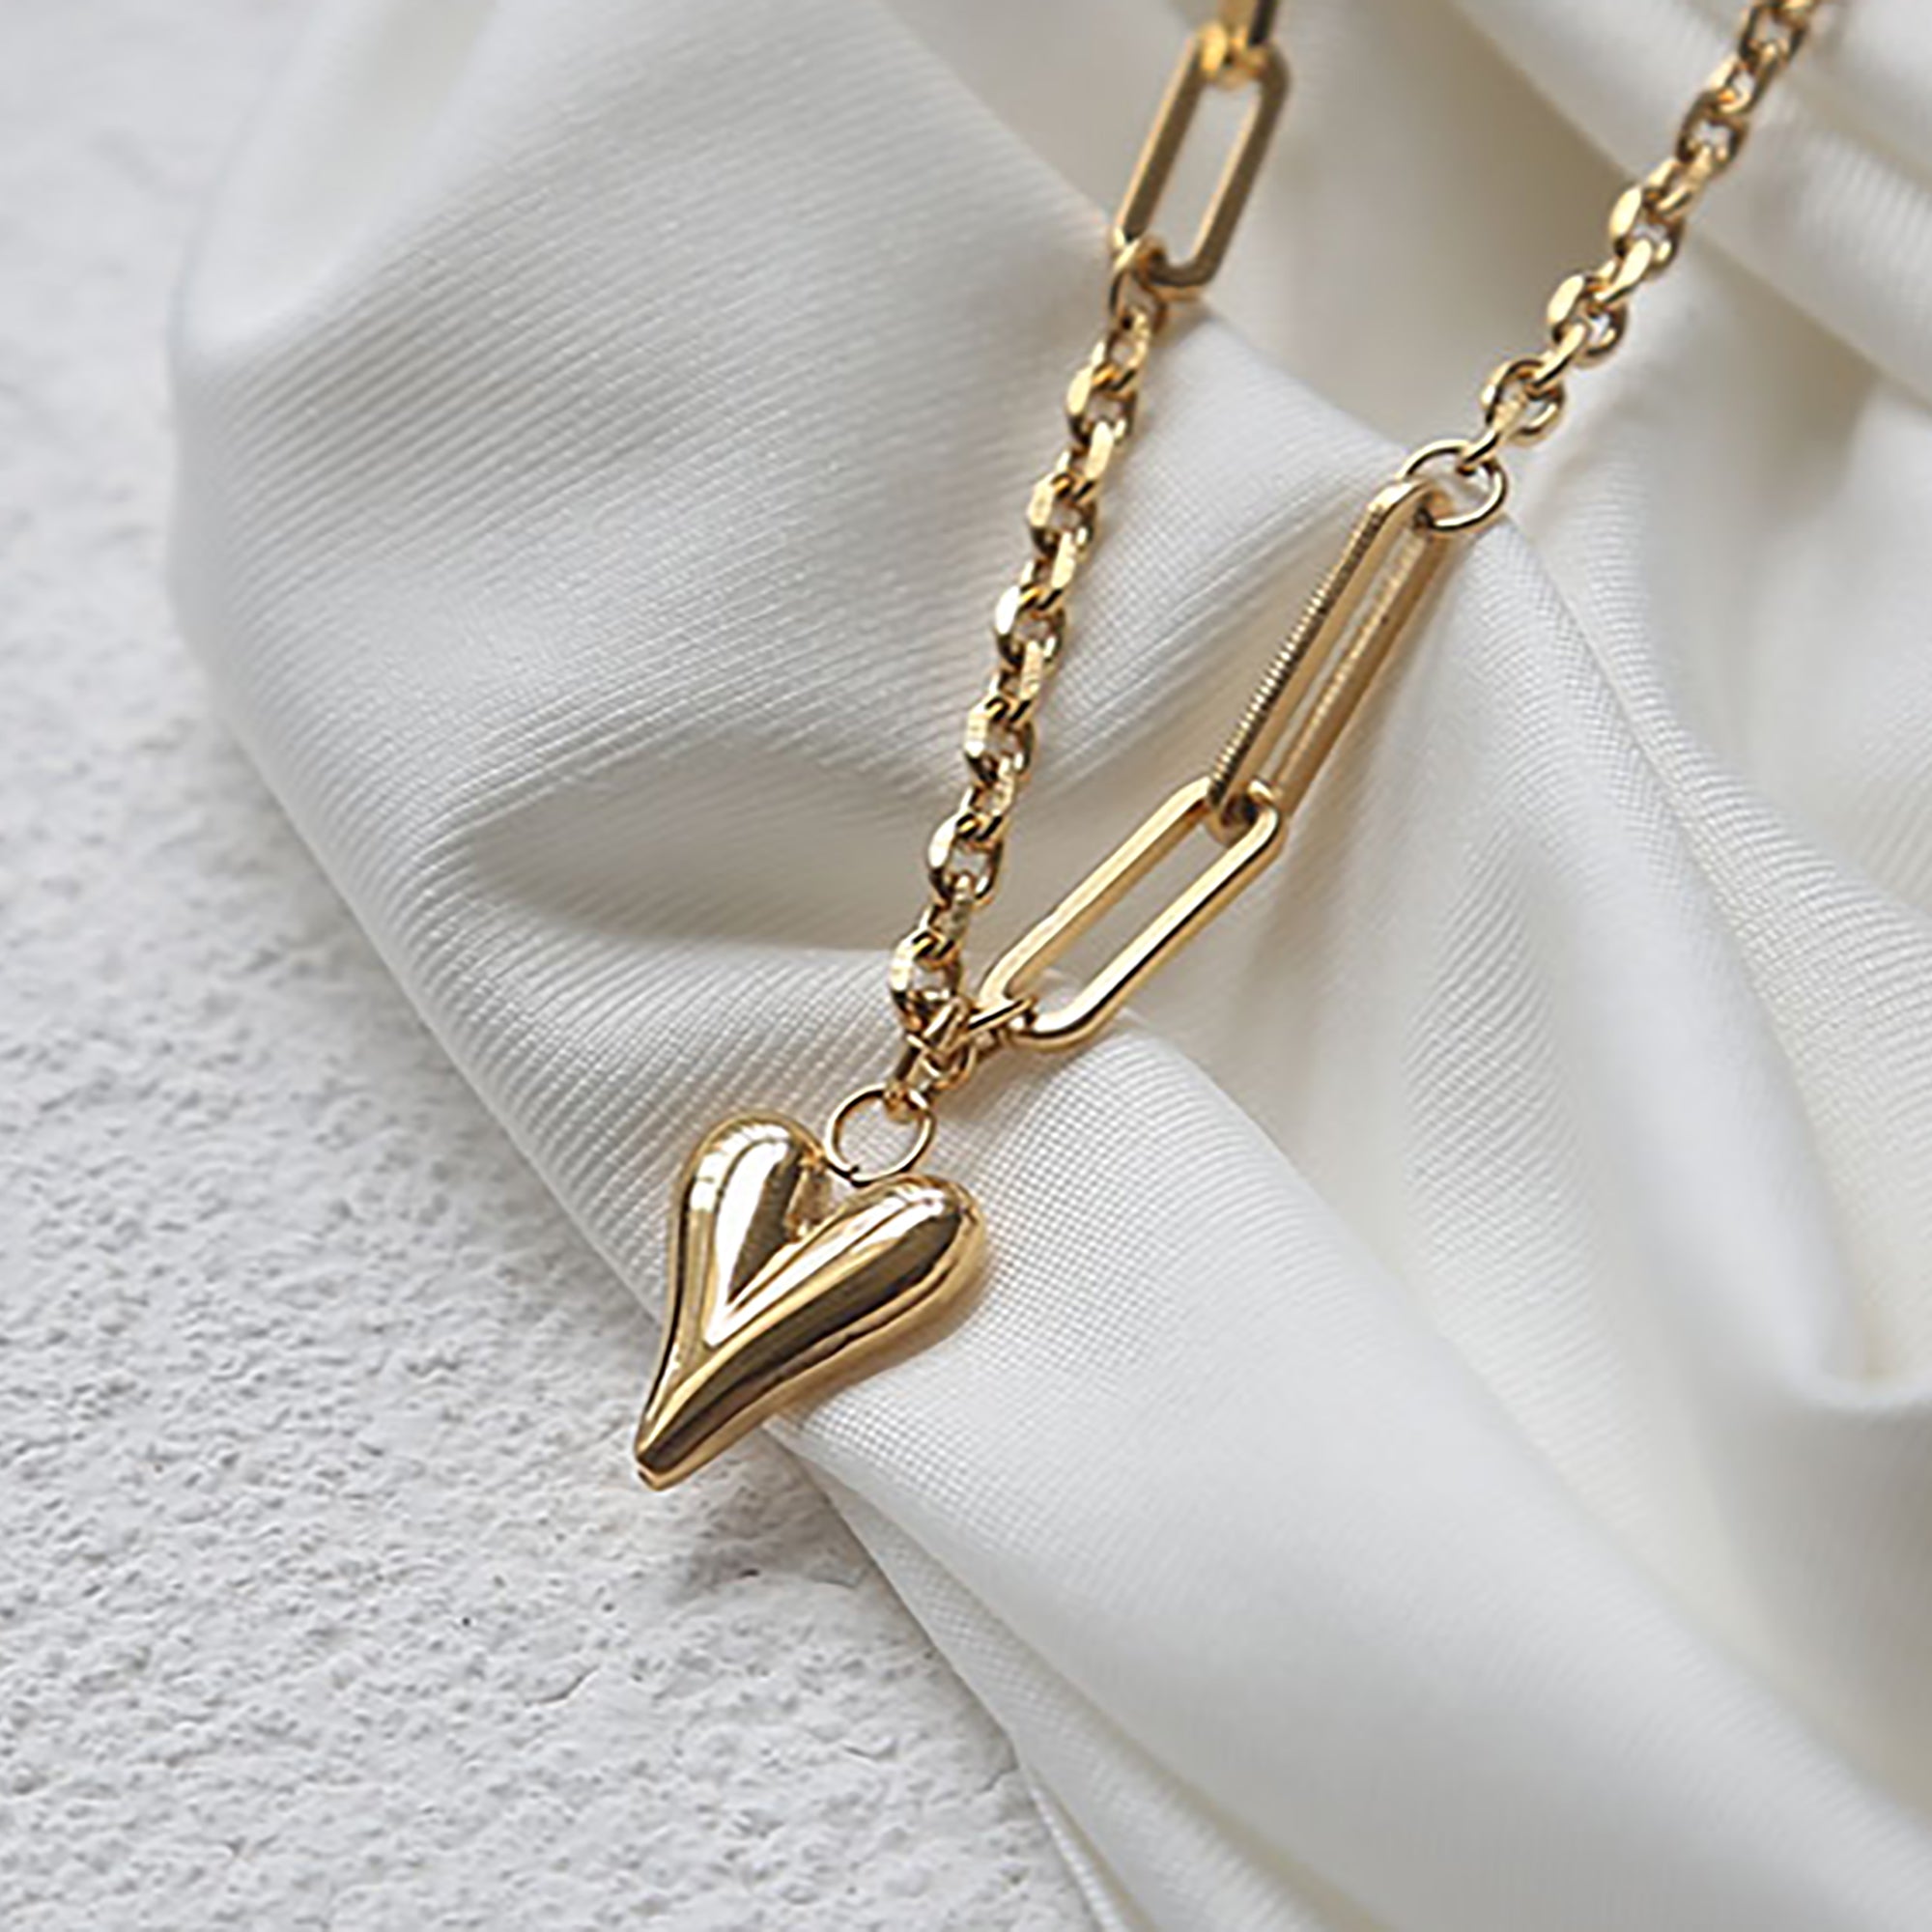 18K Gold Plated Heart Pendant Necklace Gift wedding influencer styling KOL / Youtuber / Celebrity / Fashion Icon picked